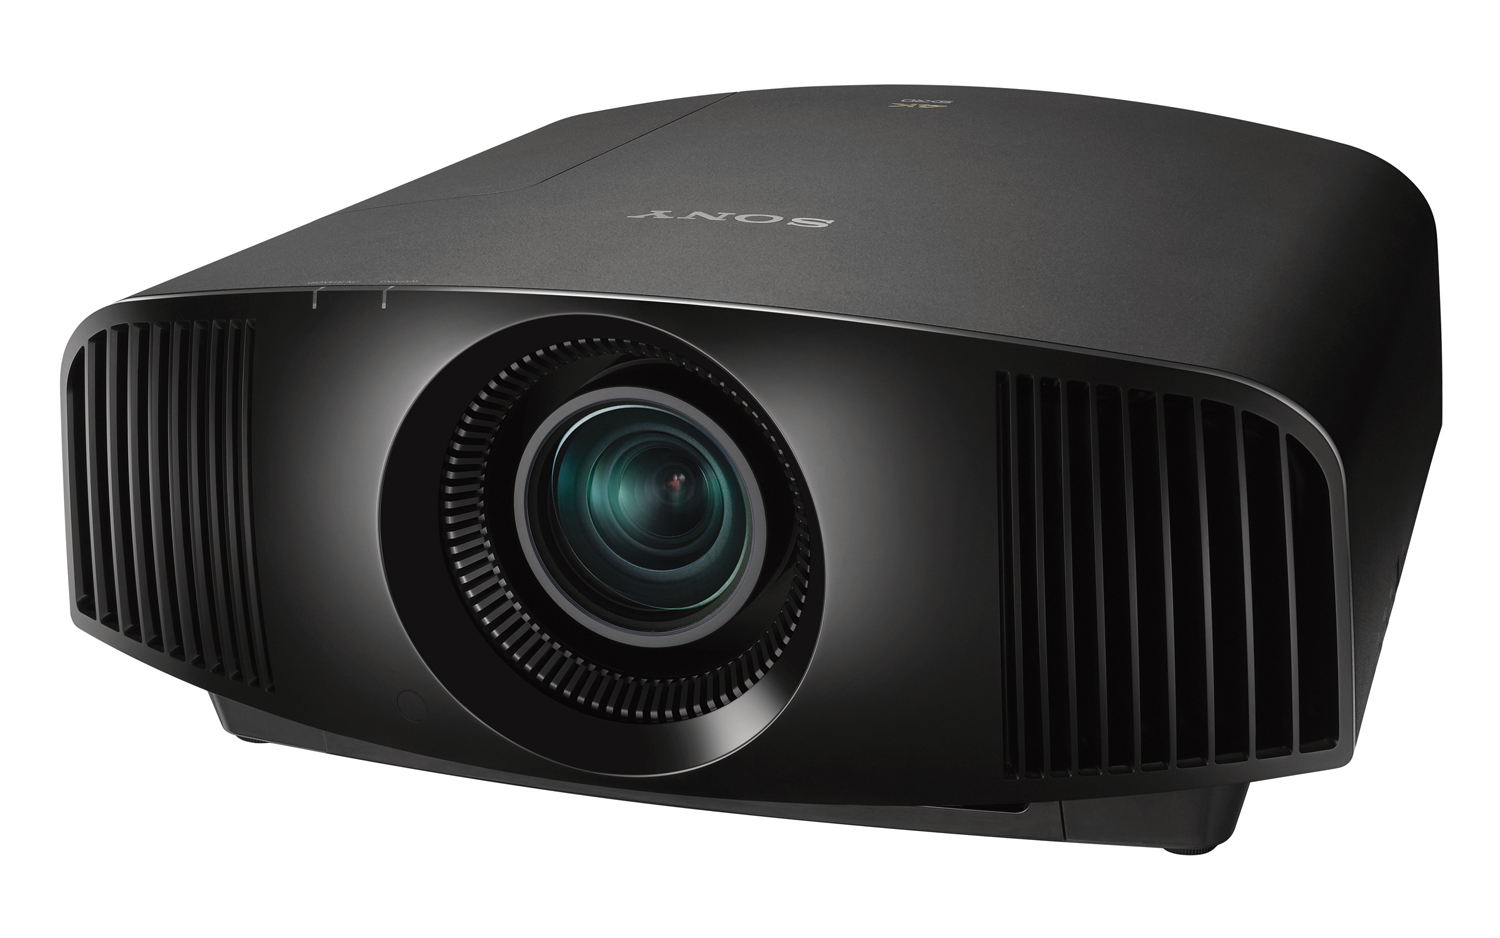 sony-announces-new-native-4k-projectors,-including-entry-level-vpl-vw290es